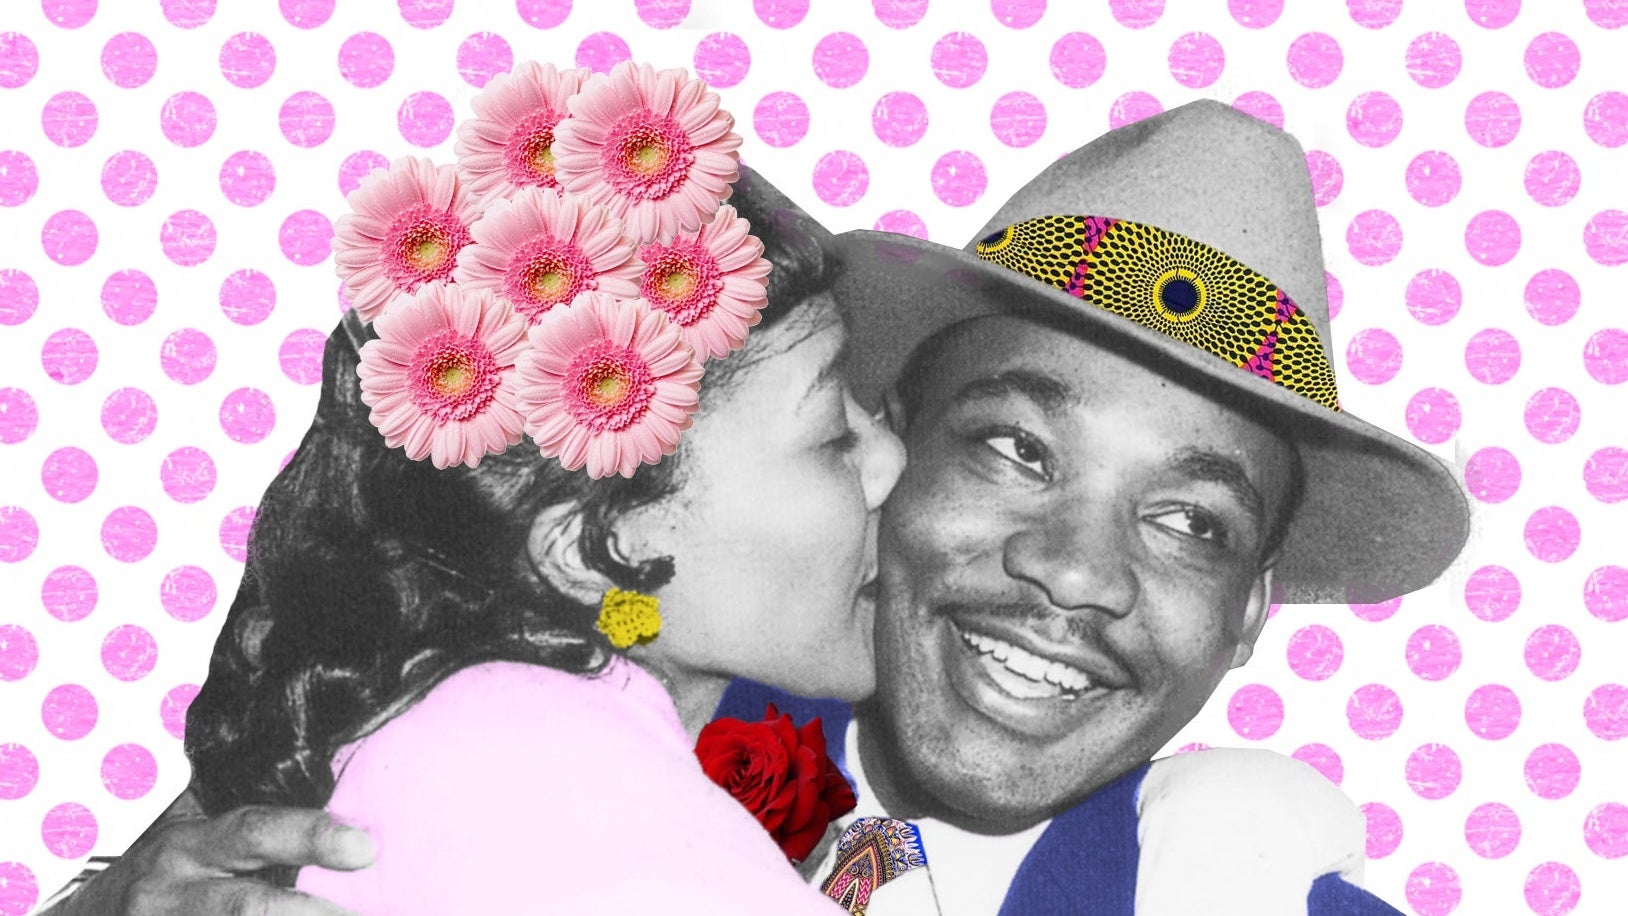 15 Photos That Show Martin Luther King Jr. and Coretta Scott King's Iconic Love